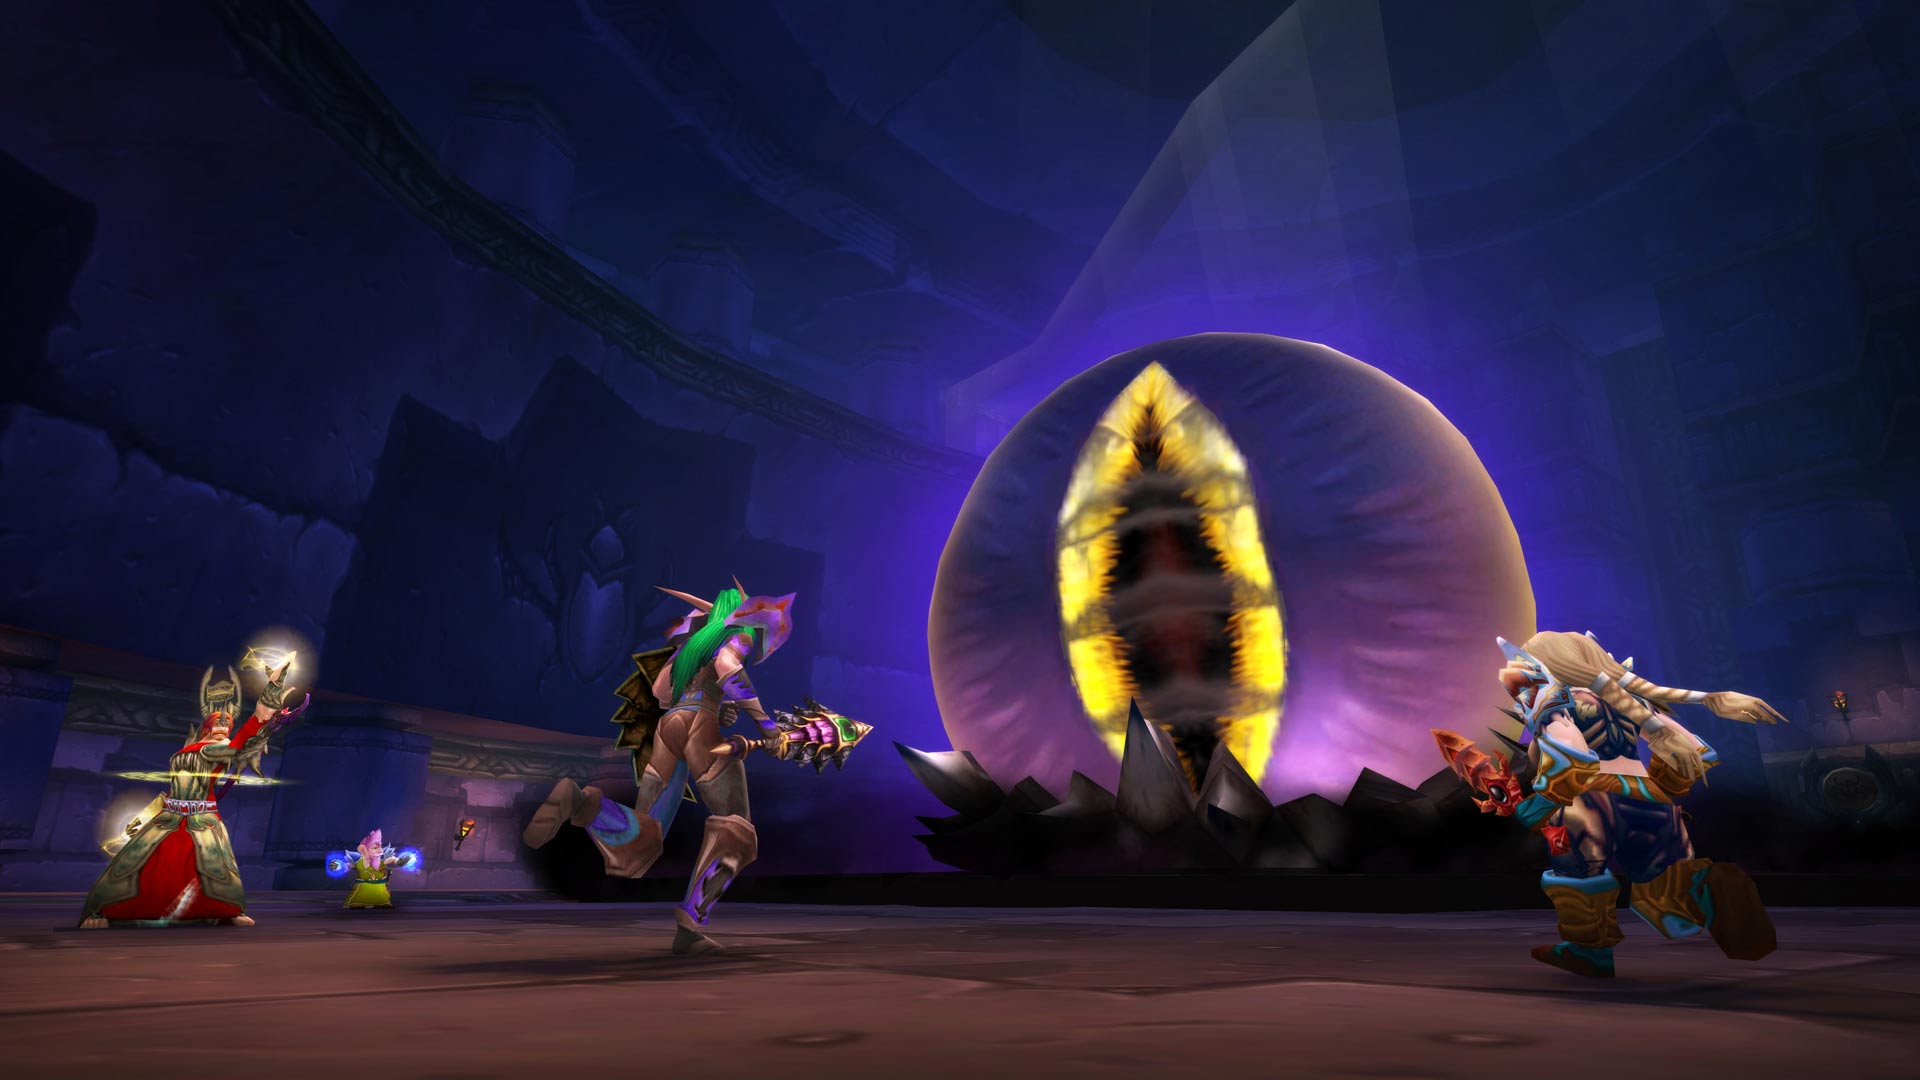 World of Warcraft Legion Expansion Release Date Announced, Online Event